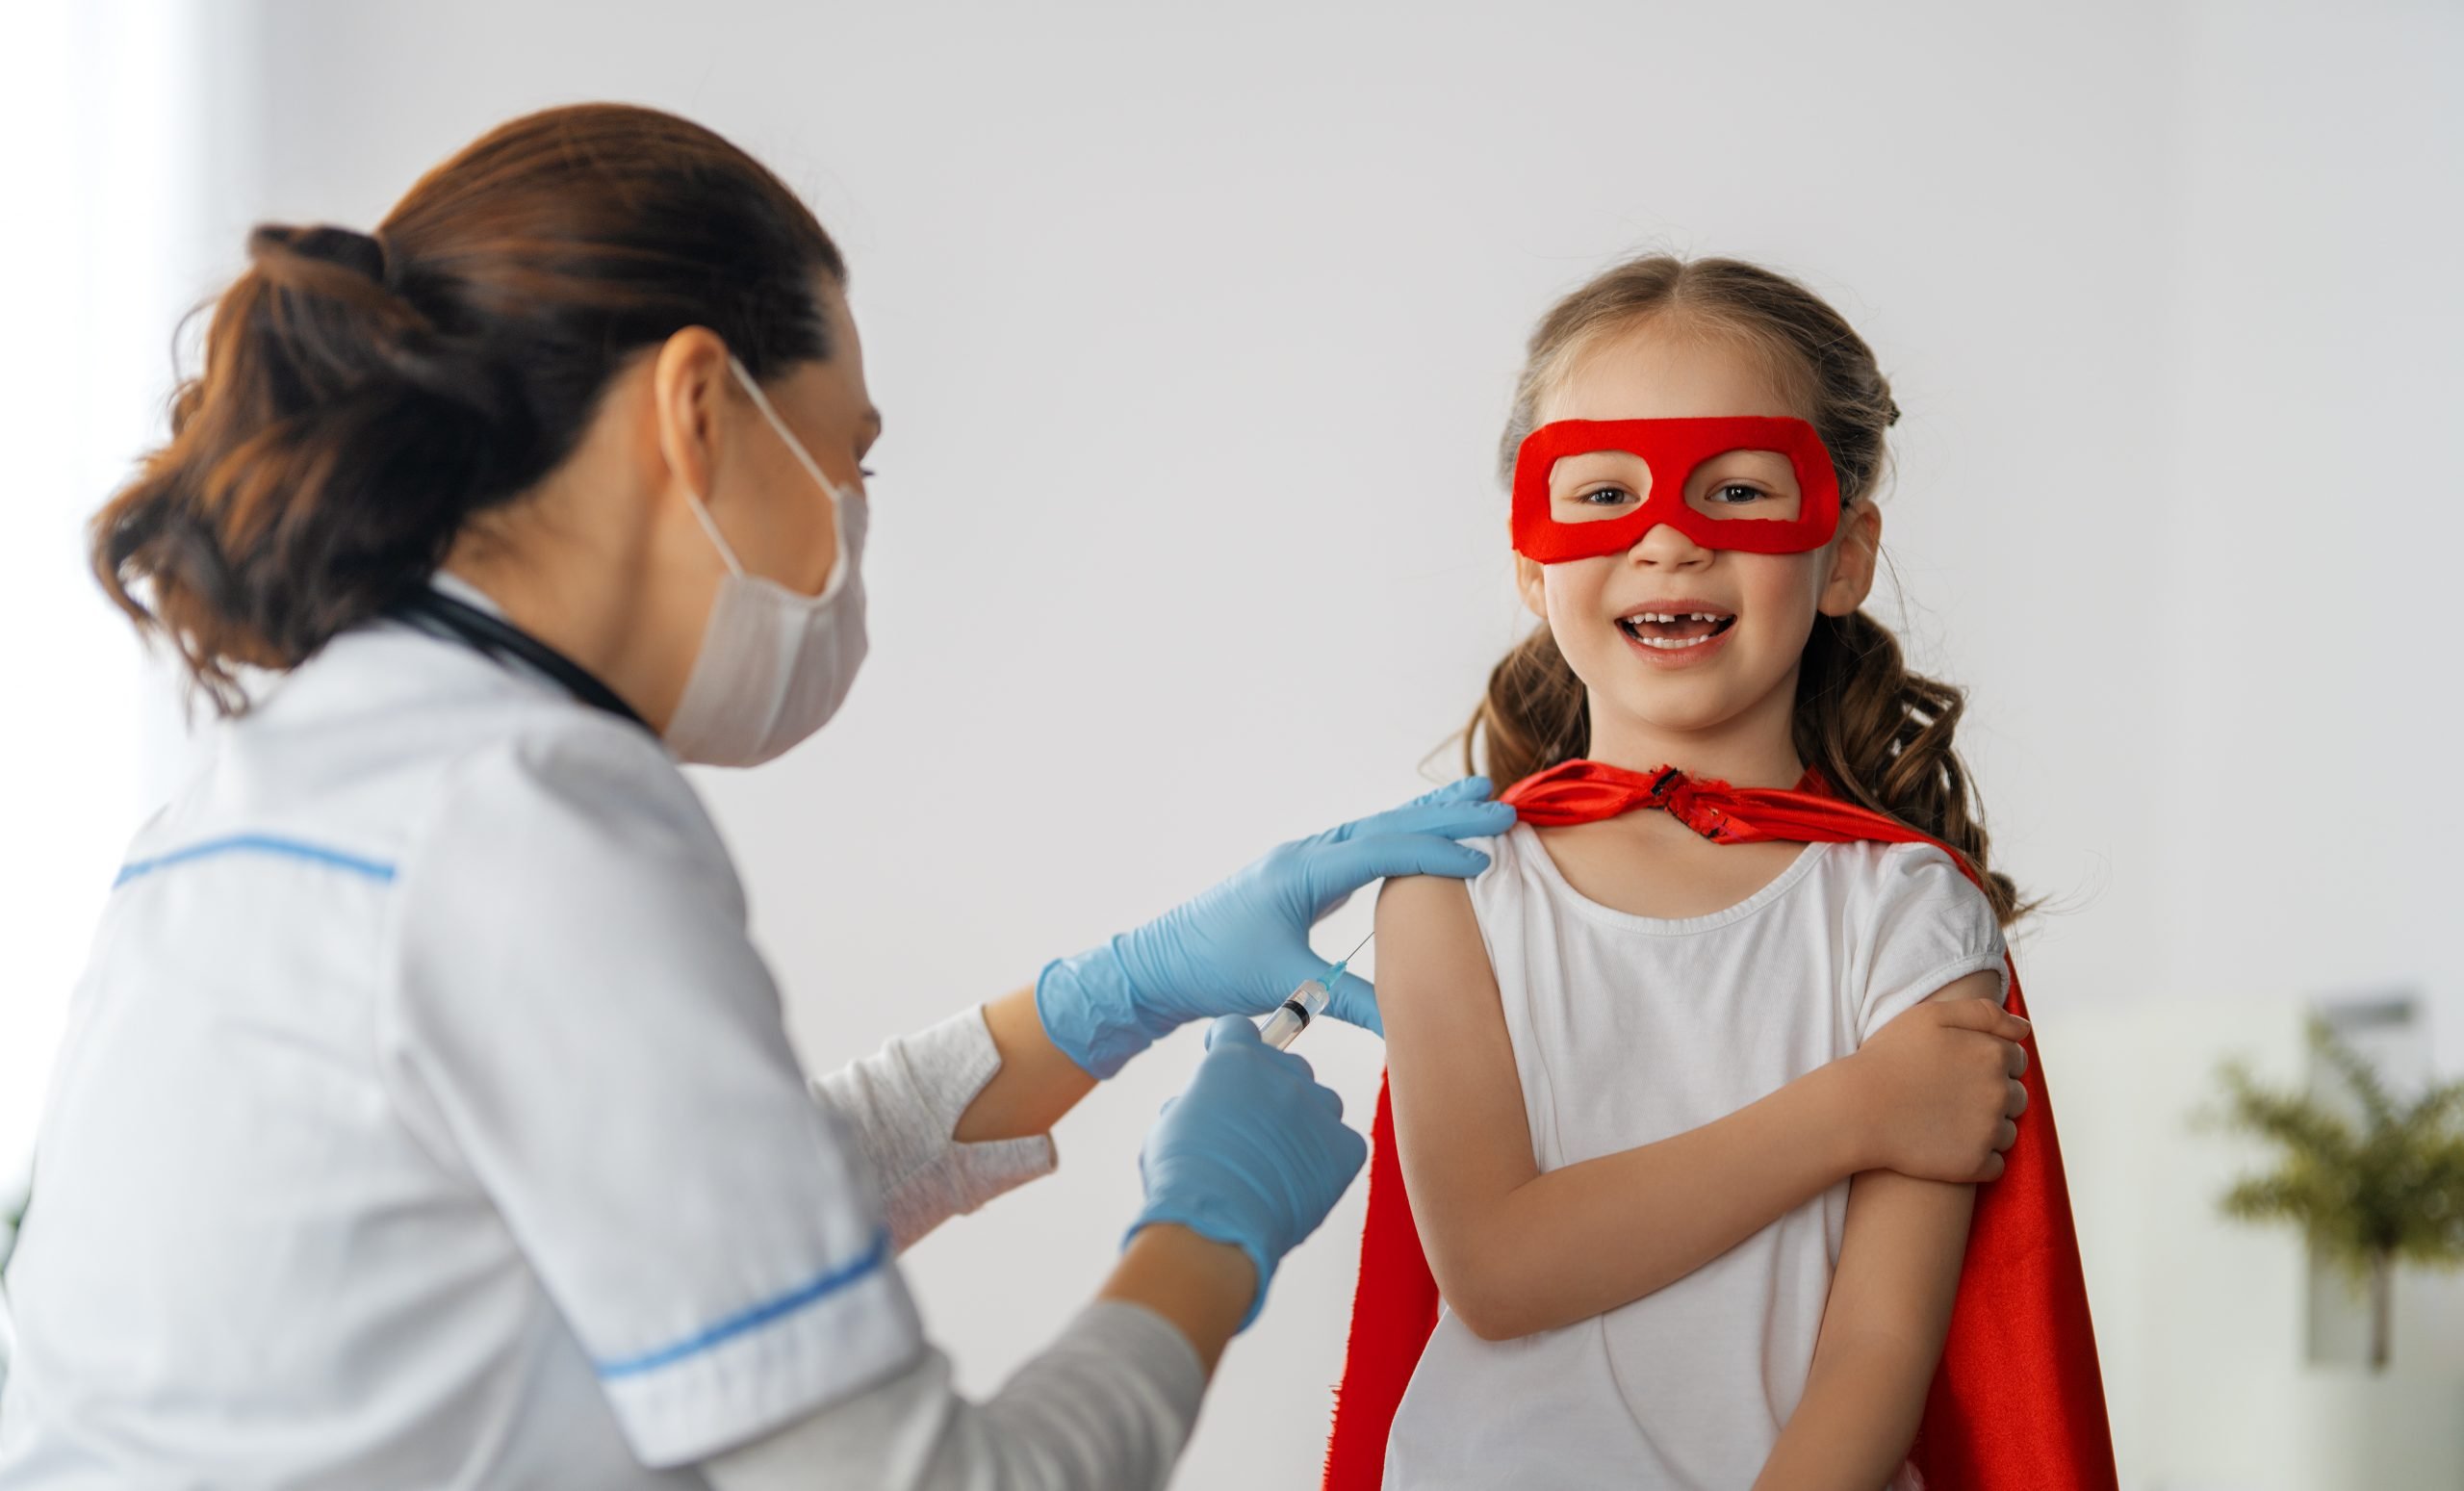 Doctor vaccinating child at hospital. Kid in superhero costume.